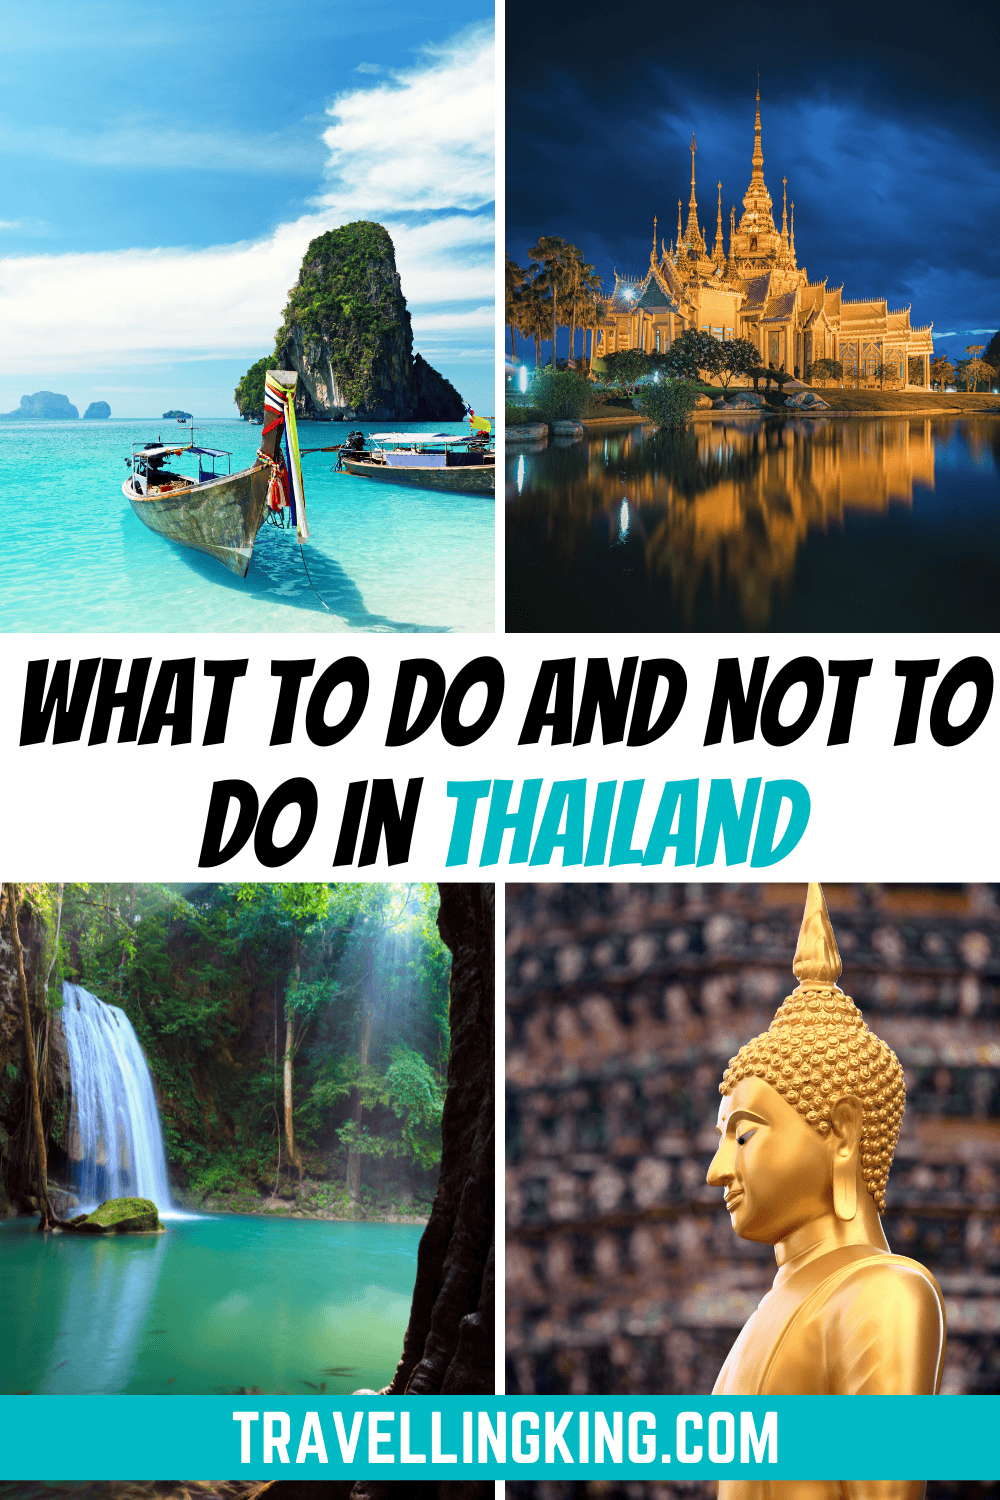 What To Do And Not To Do In Thailand